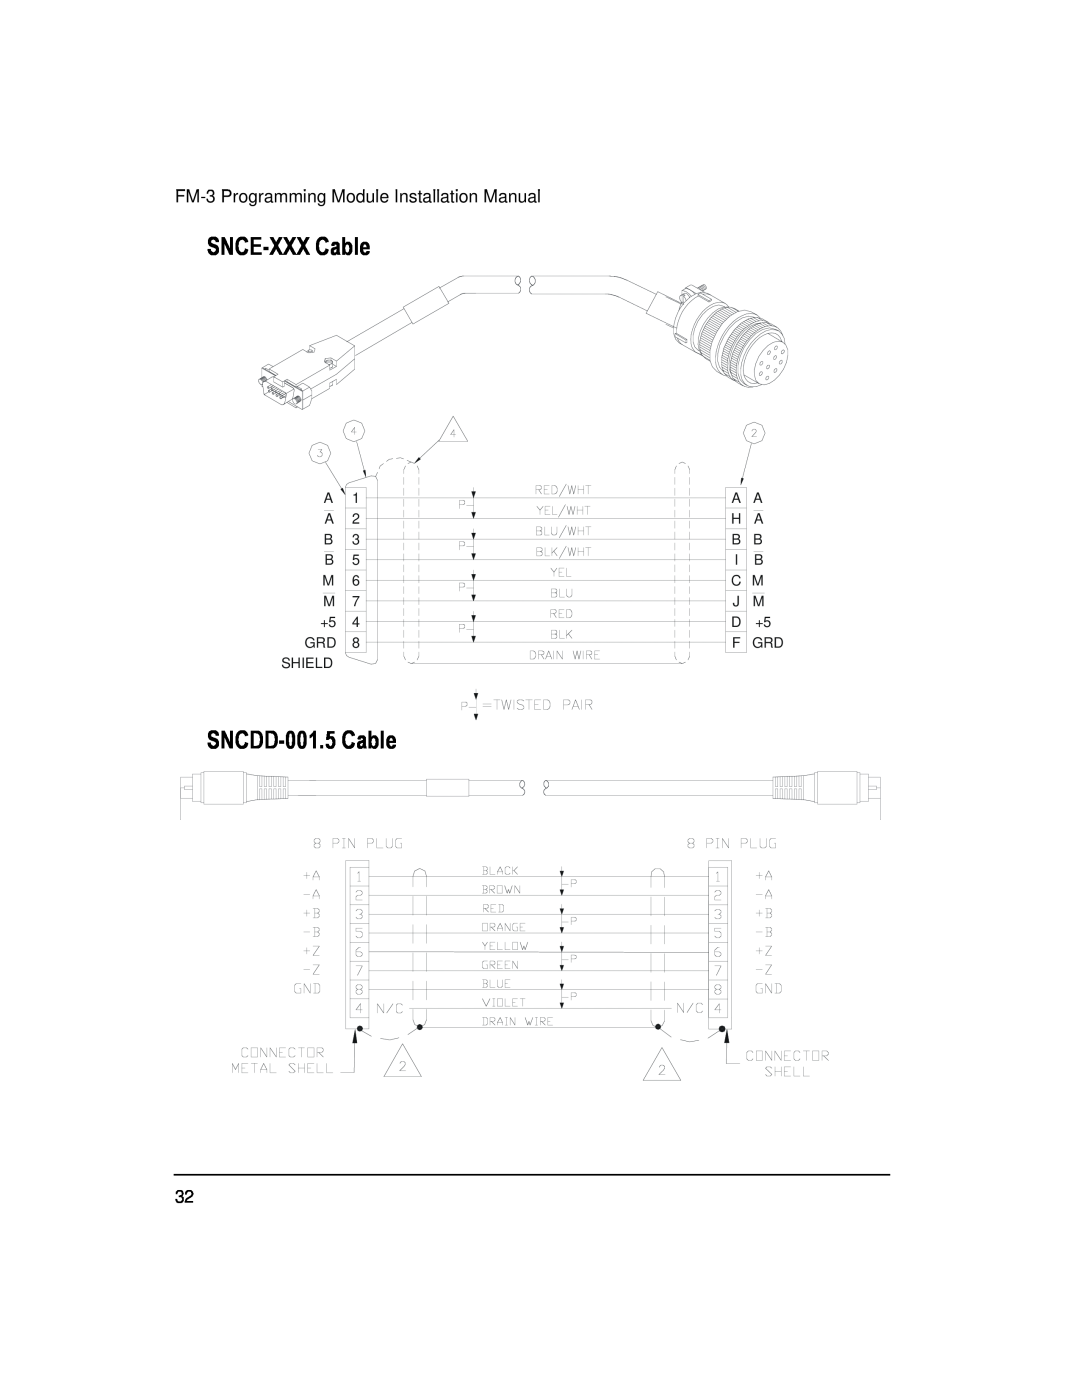 Emerson 400508-02 installation manual SNCE-XXX Cable, SNCDD-001.5 Cable, FM-3 Programming Module Installation Manual 